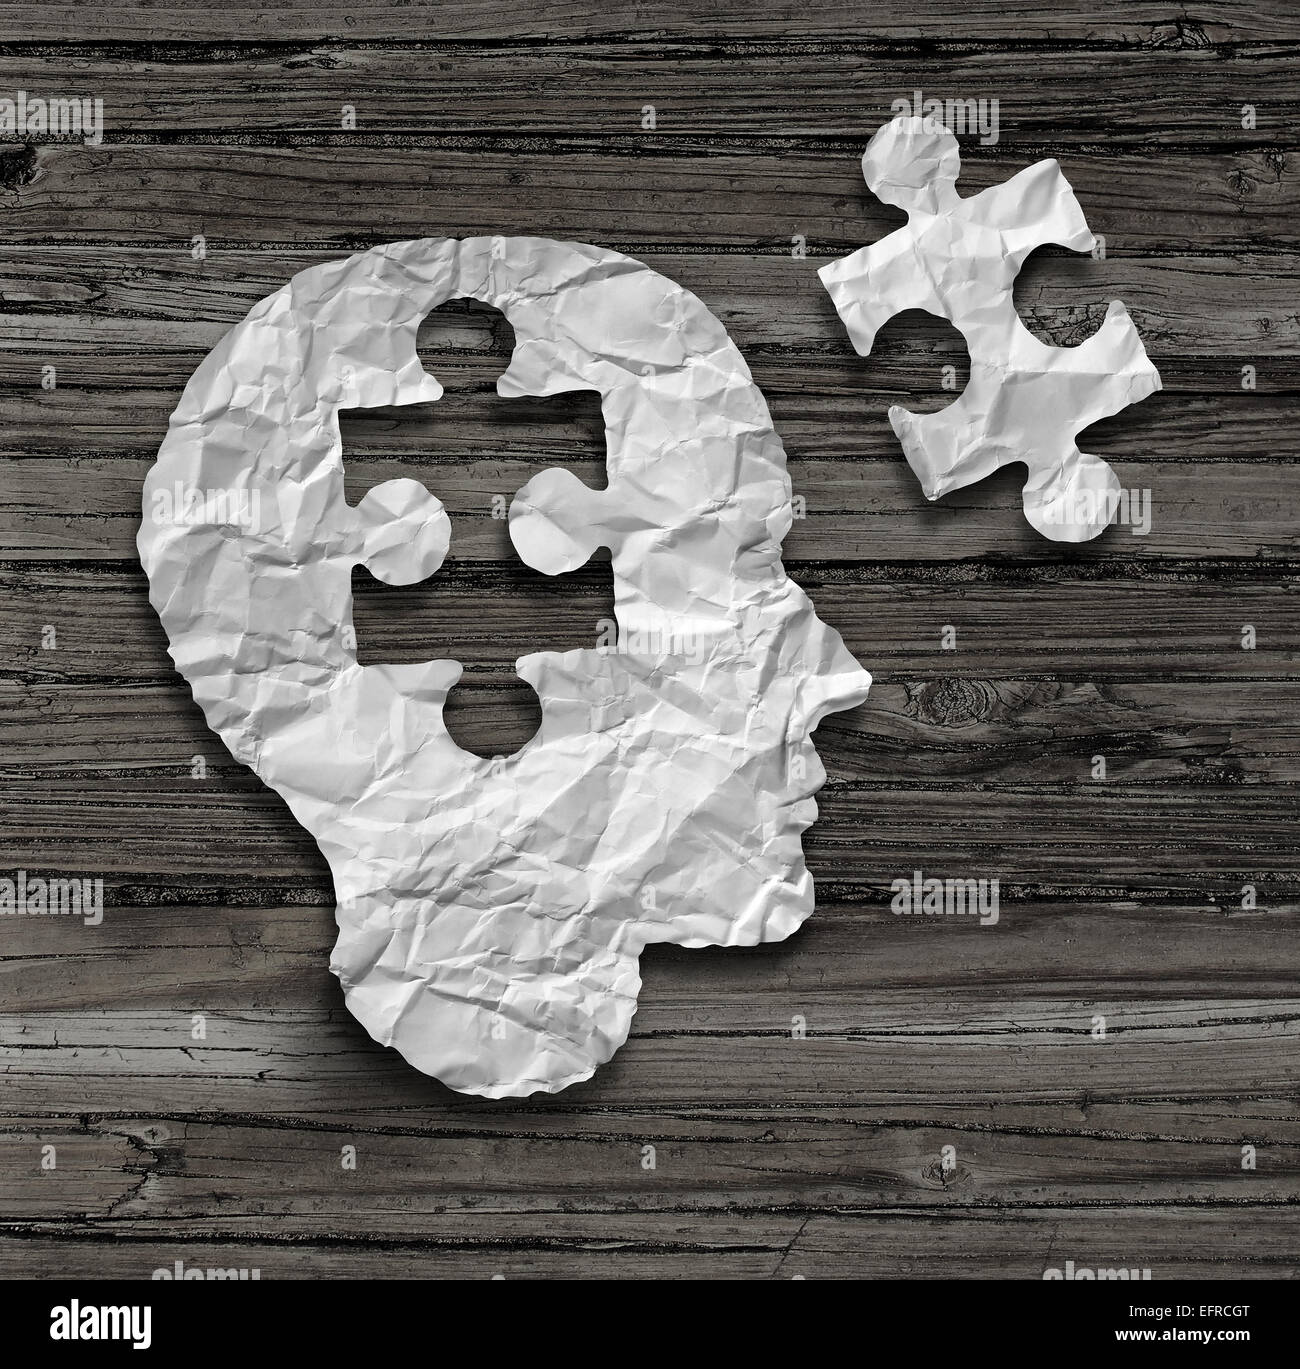 Puzzle head brain concept as a human face profile made from crumpled white paper with a jigsaw piece cut out on a rustic old wood background as a mental health symbol. Stock Photo